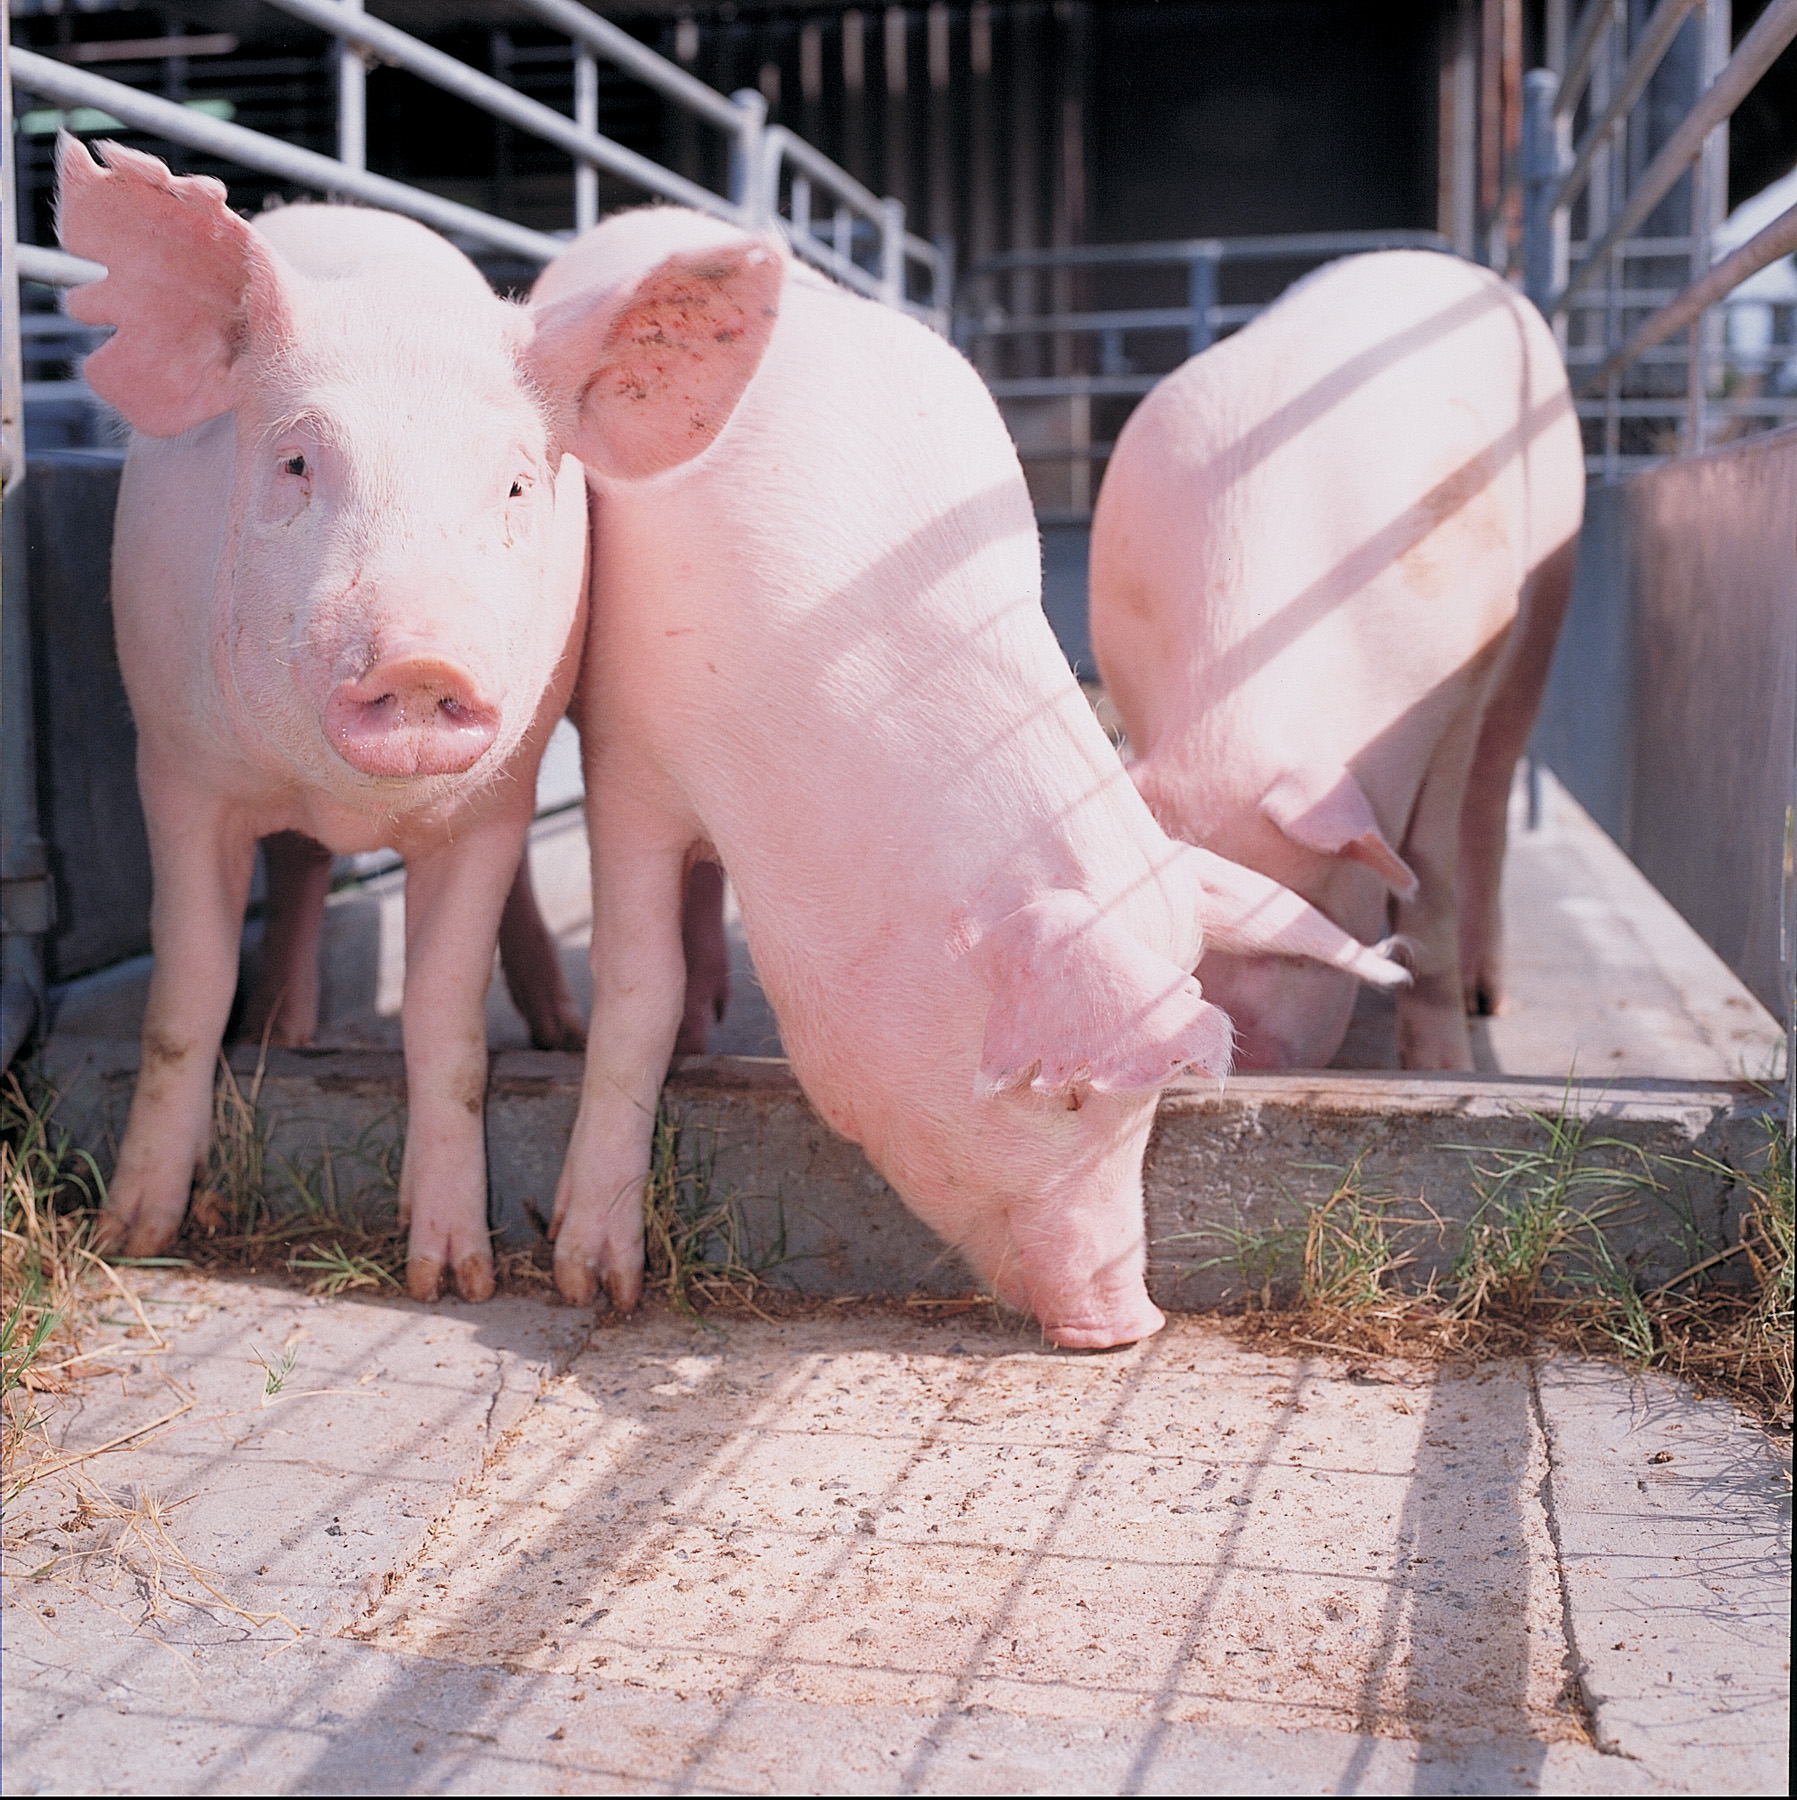 Pig feed: why it is illegal to feed food scraps (swill) to pigs ...